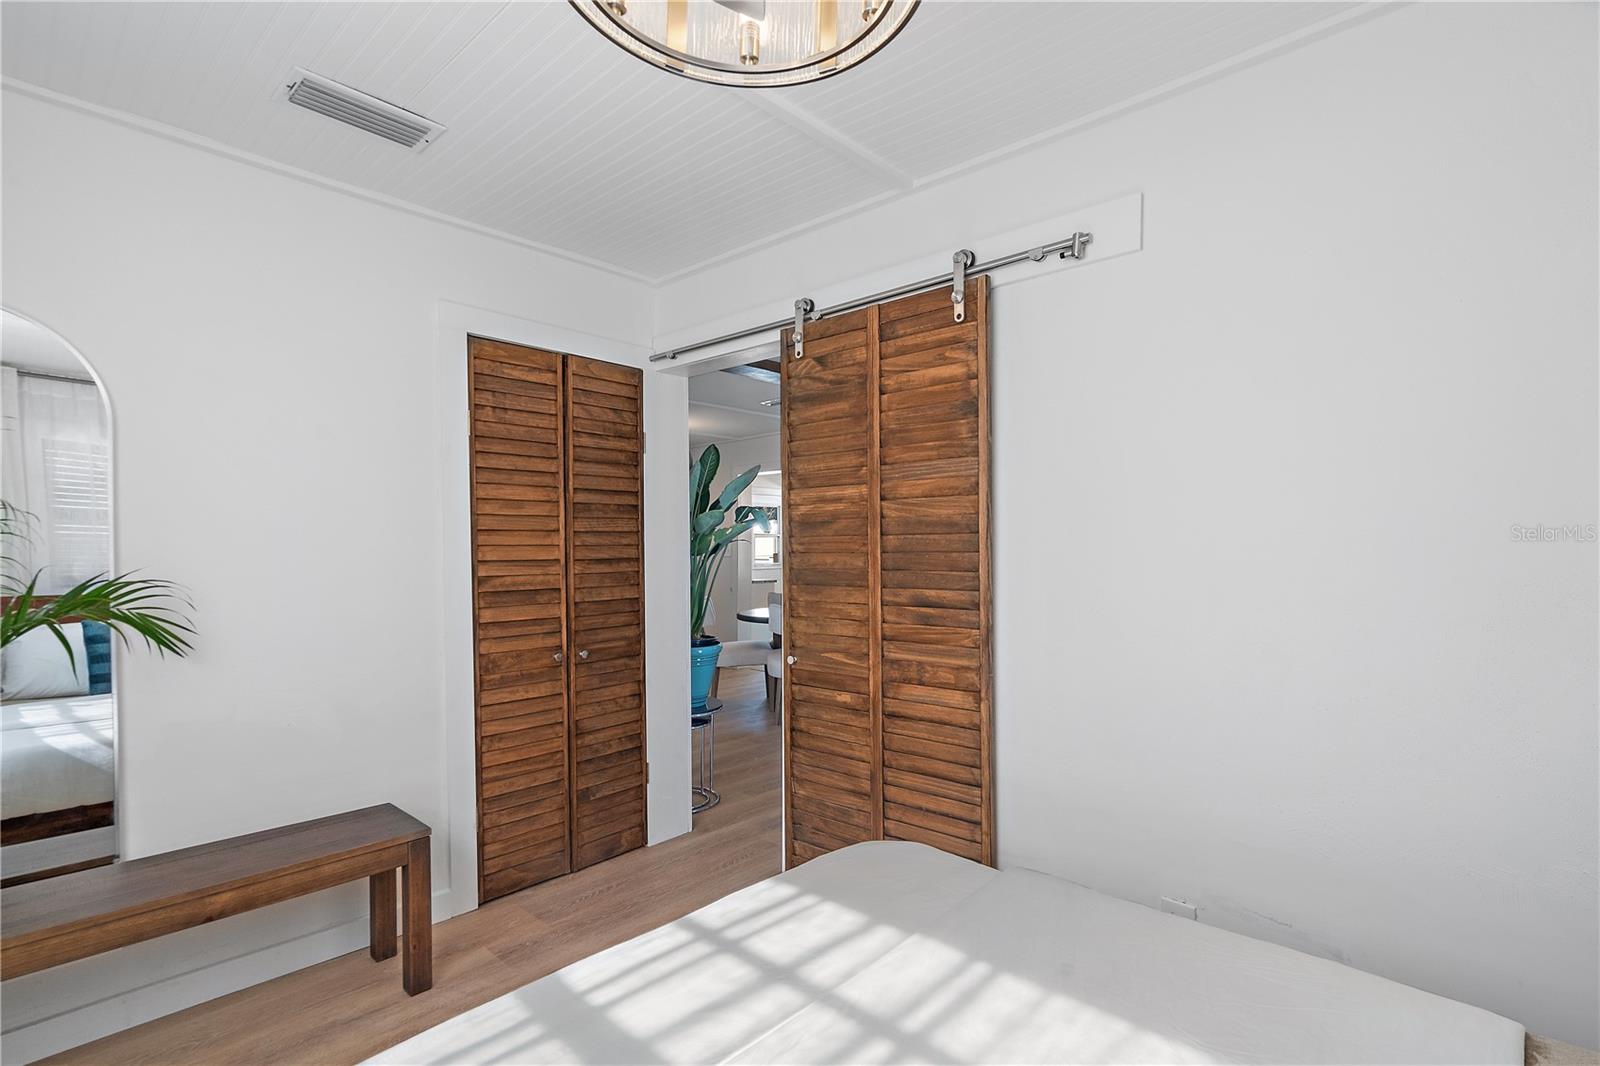 A wood shutter barn door adds privacy and character. The cedar closet is an elegant and practical addition, offering superior protection for stored items while adding a touch of natural beauty.